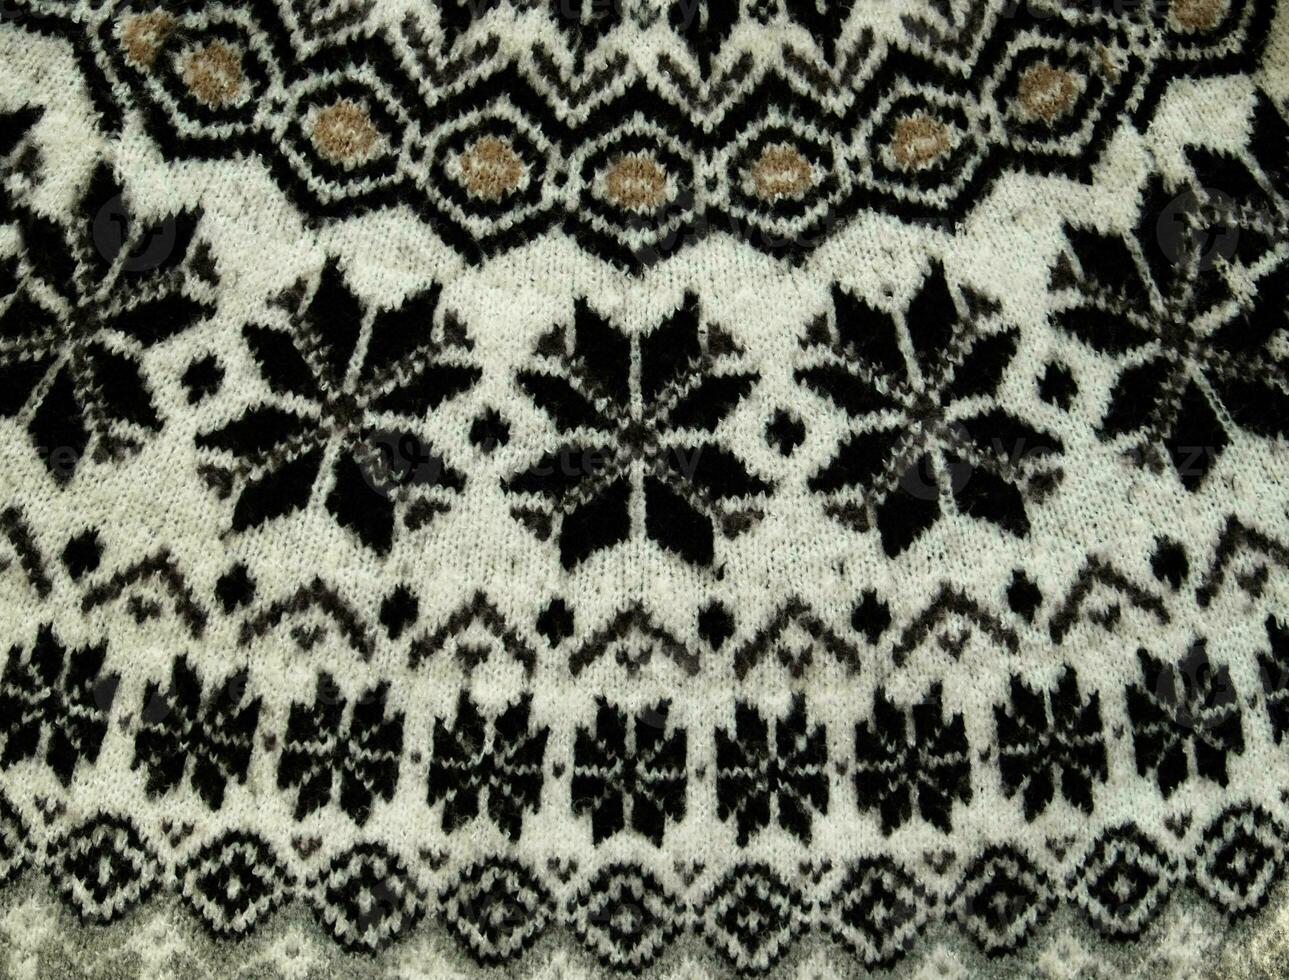 Black and white Winter Knitted Sweater Pattern Design with snowflakes. Handmade knitting wool fabric texture. Background of kniting patterns and ornament. photo